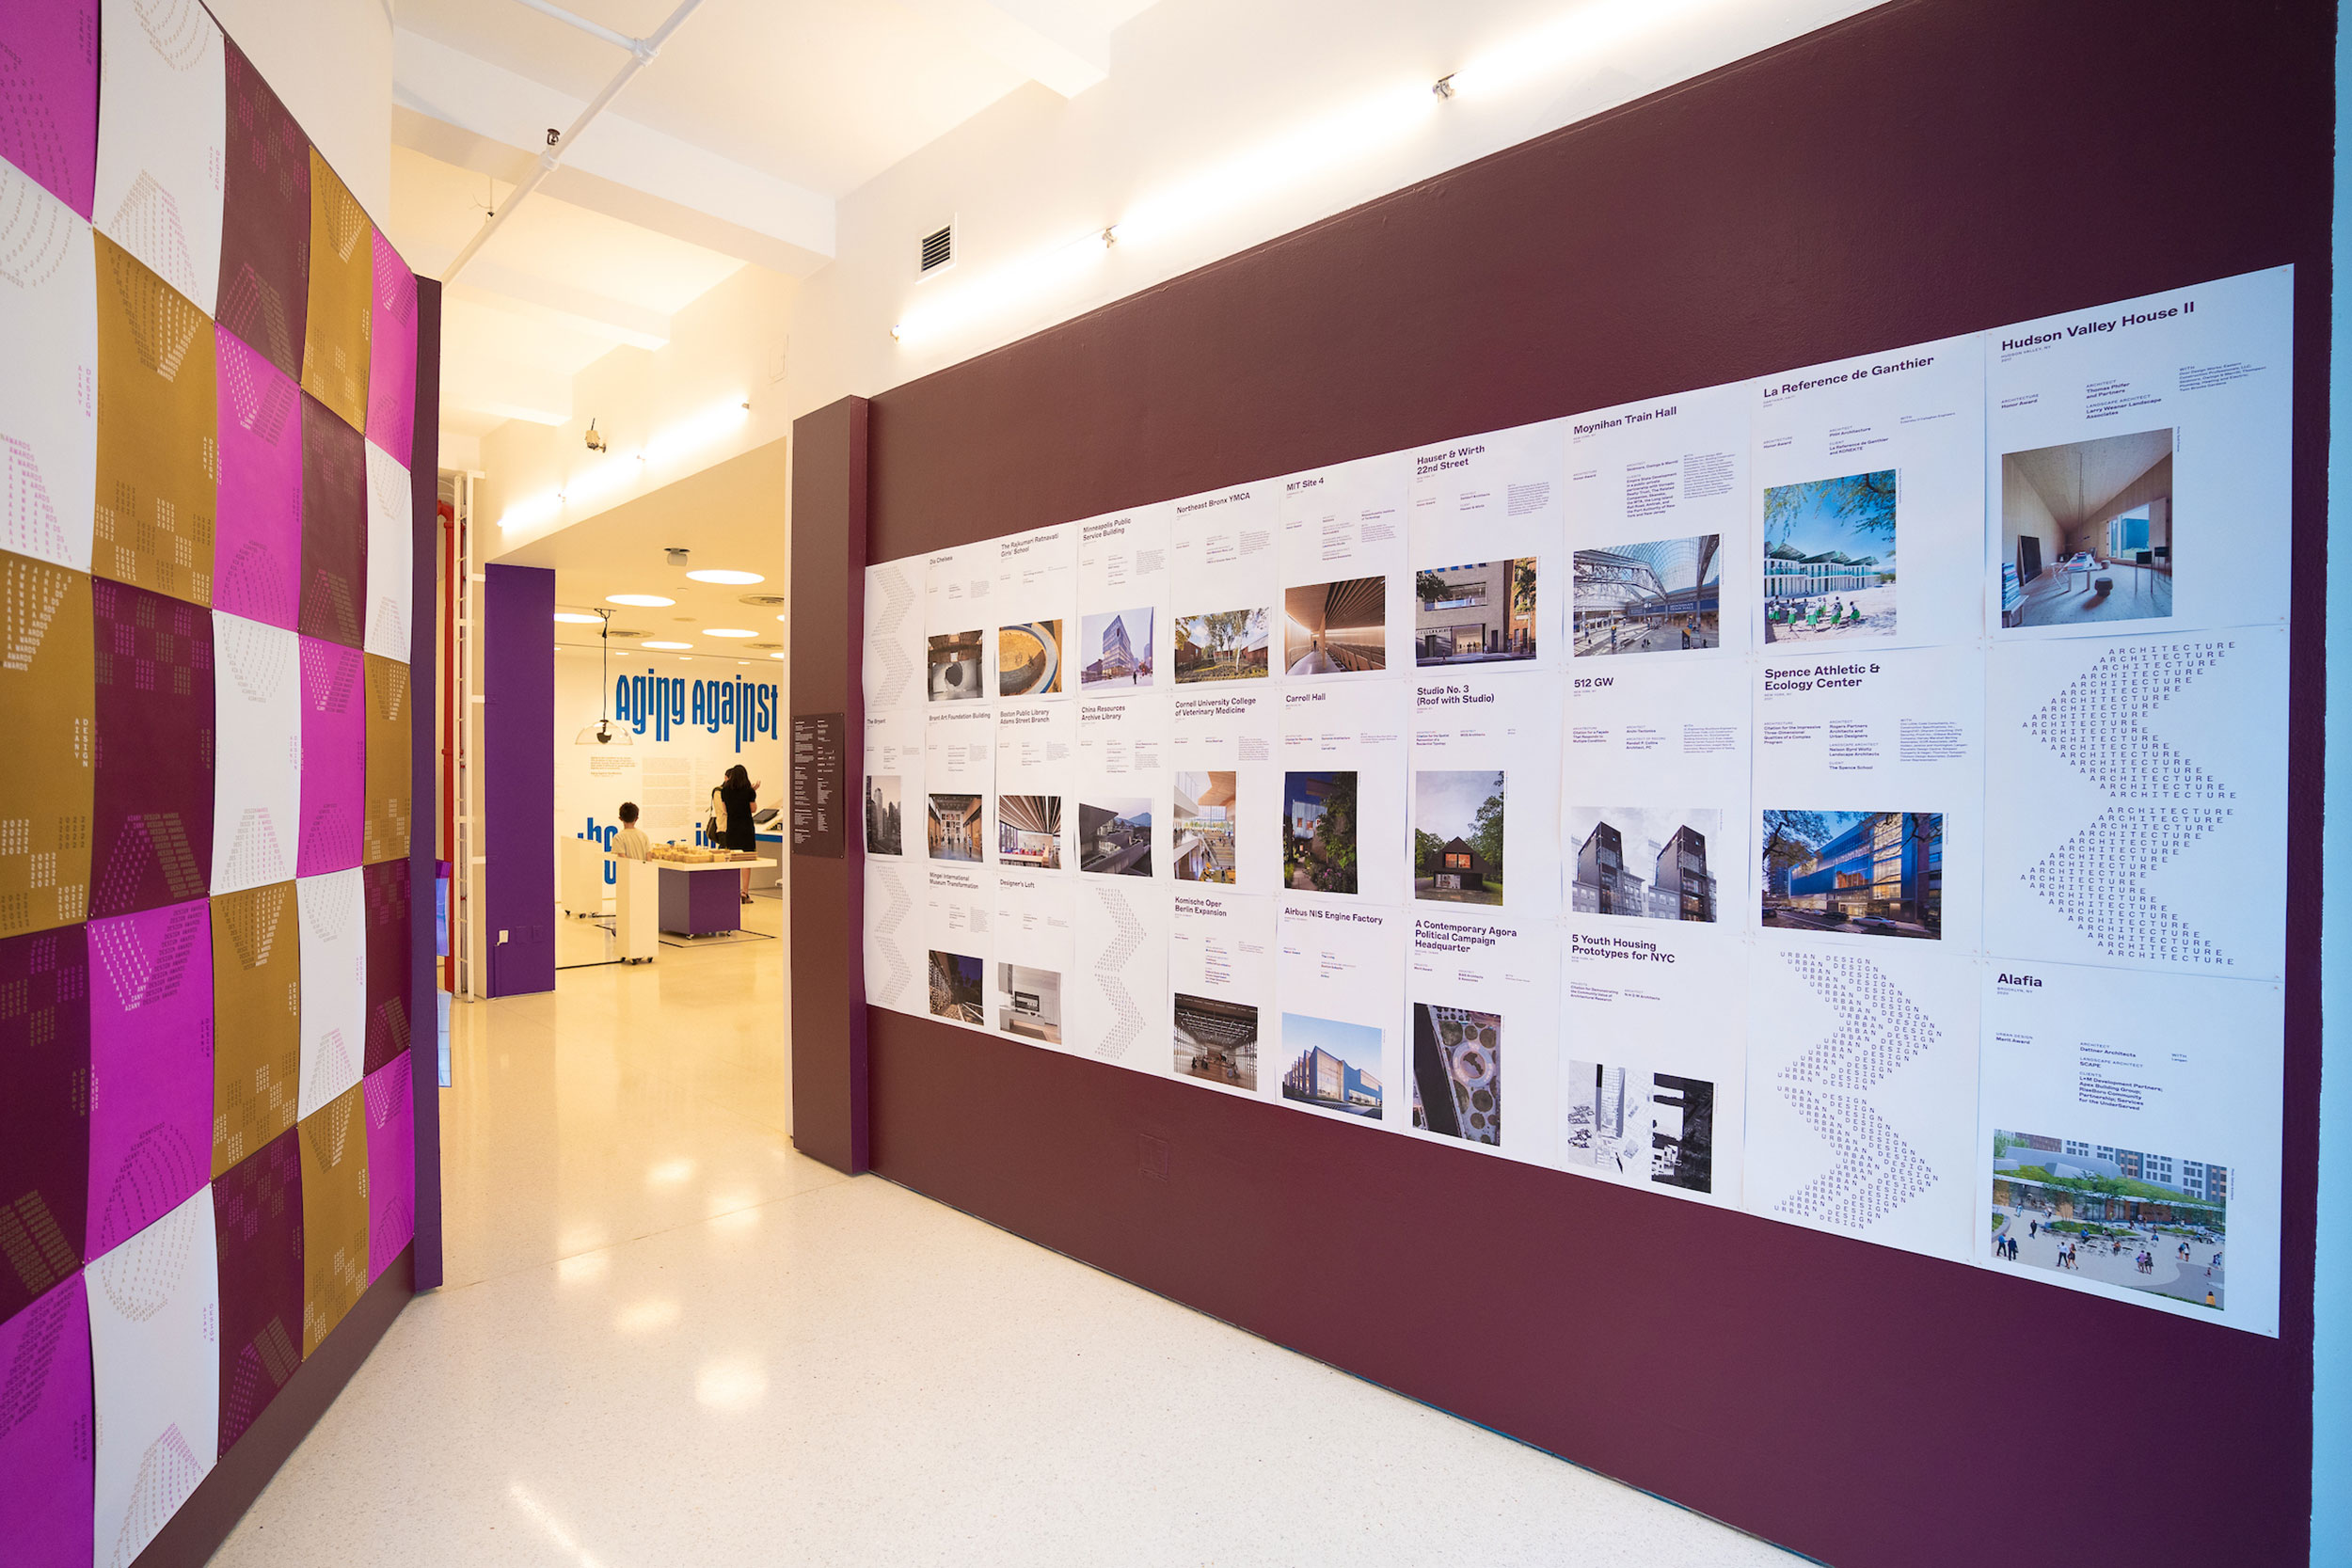 Installation view, AIANY Design Awards 2022, Center for Architecture, 2022.